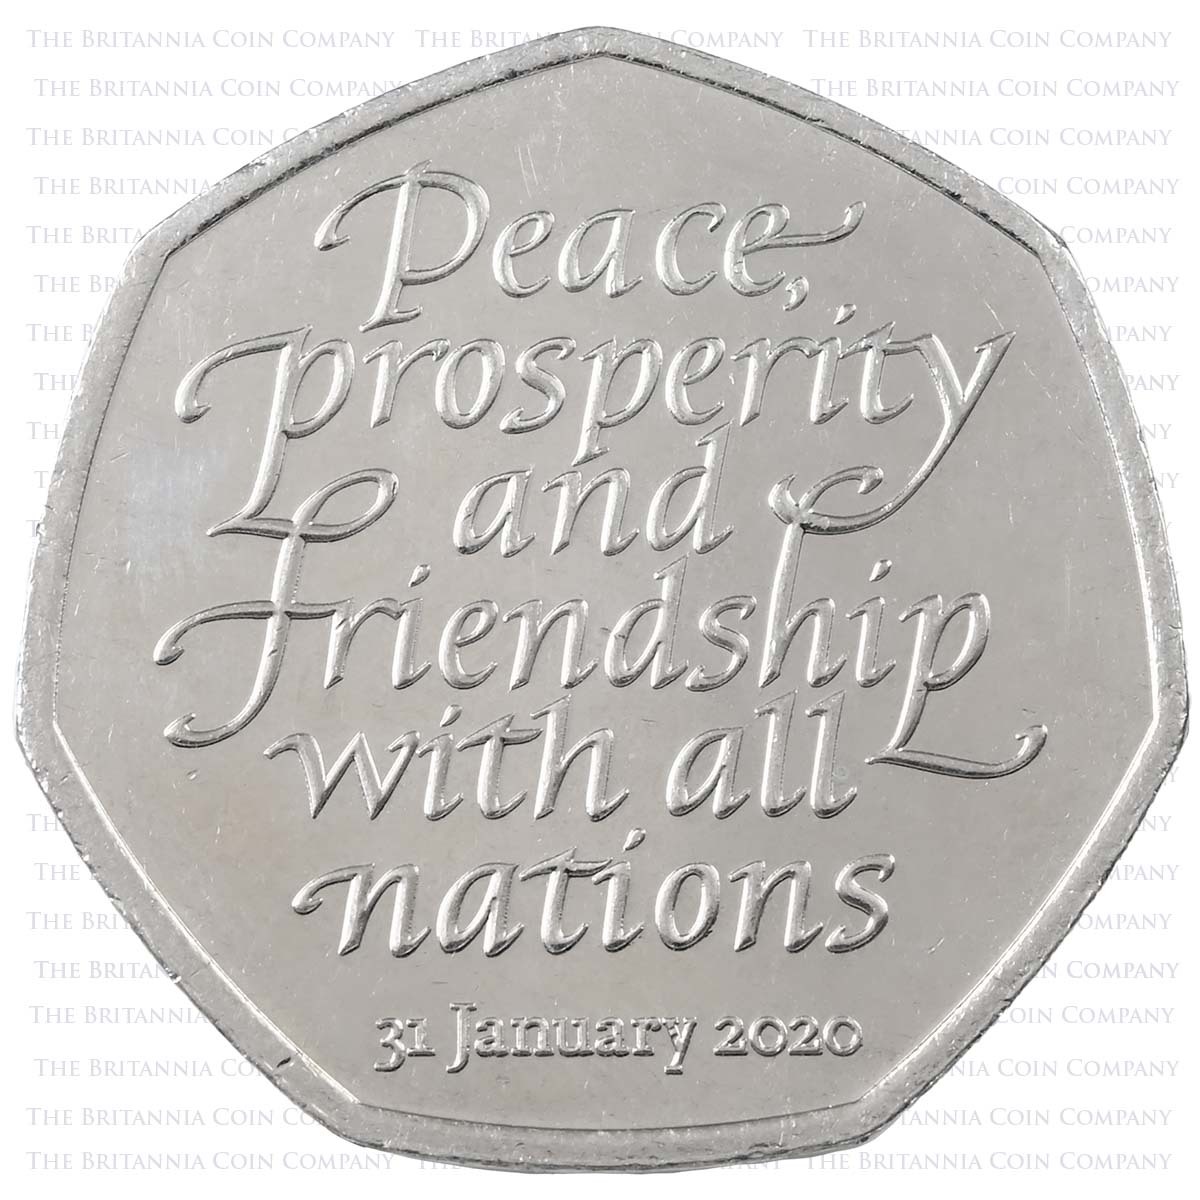 2020 Brexit EU European Union Withdrawal Peace Prosperity And Friendship Circulated Fifty Pence Coin Reverse